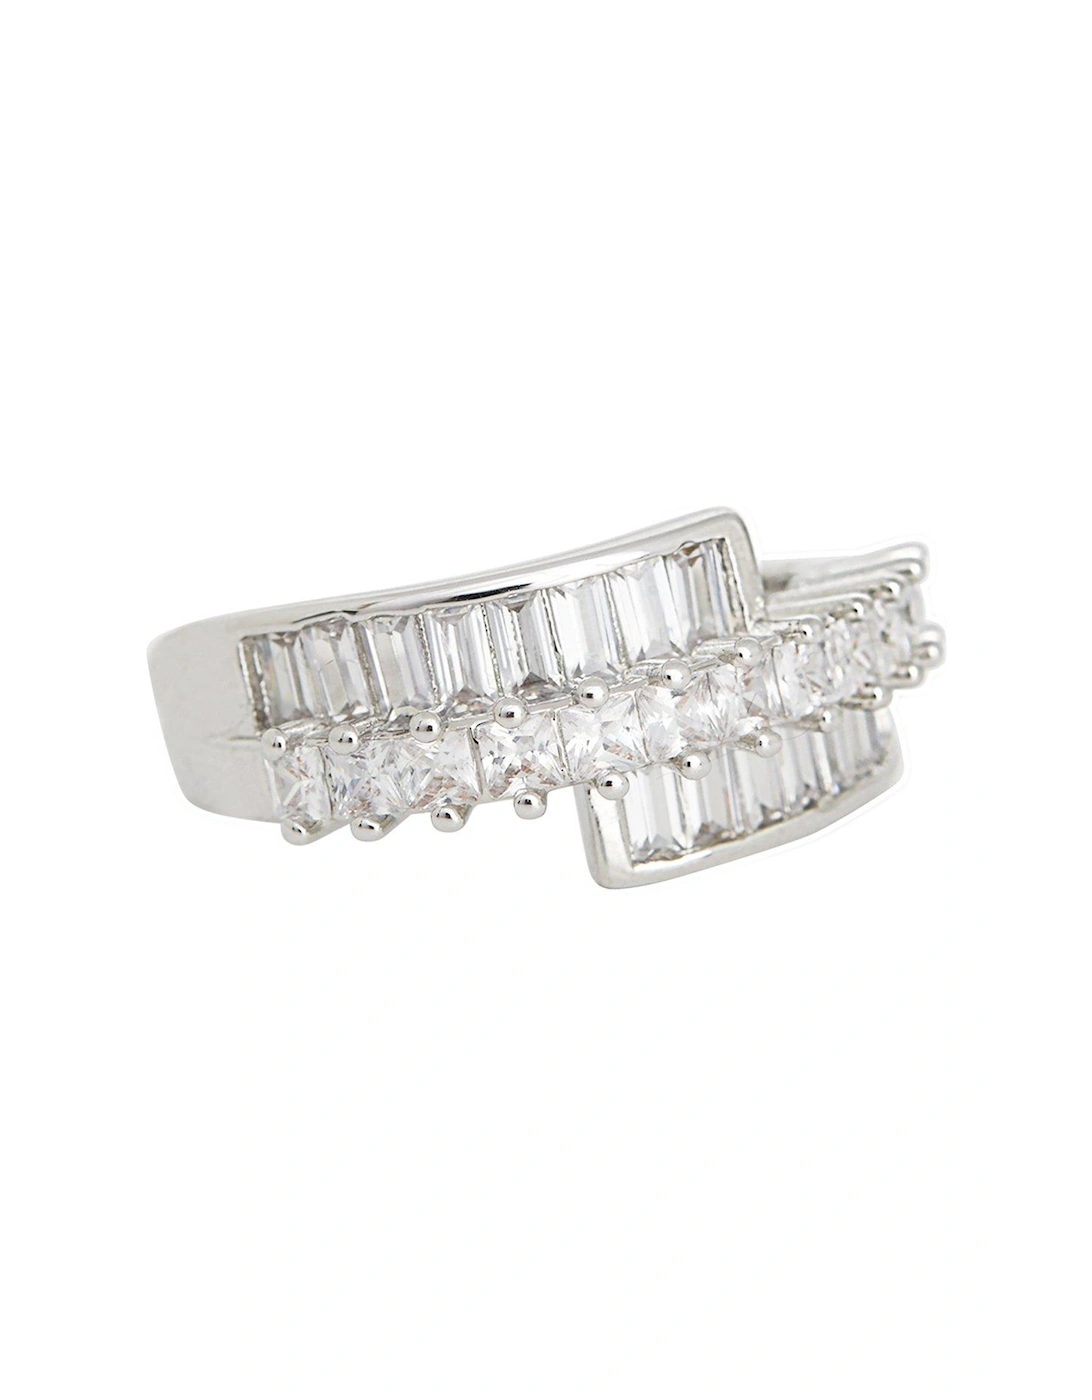 RHODIUM PLATE CUBIC ZIRCONIA BAGUETTE AND PAVE RING 16MM, 2 of 1